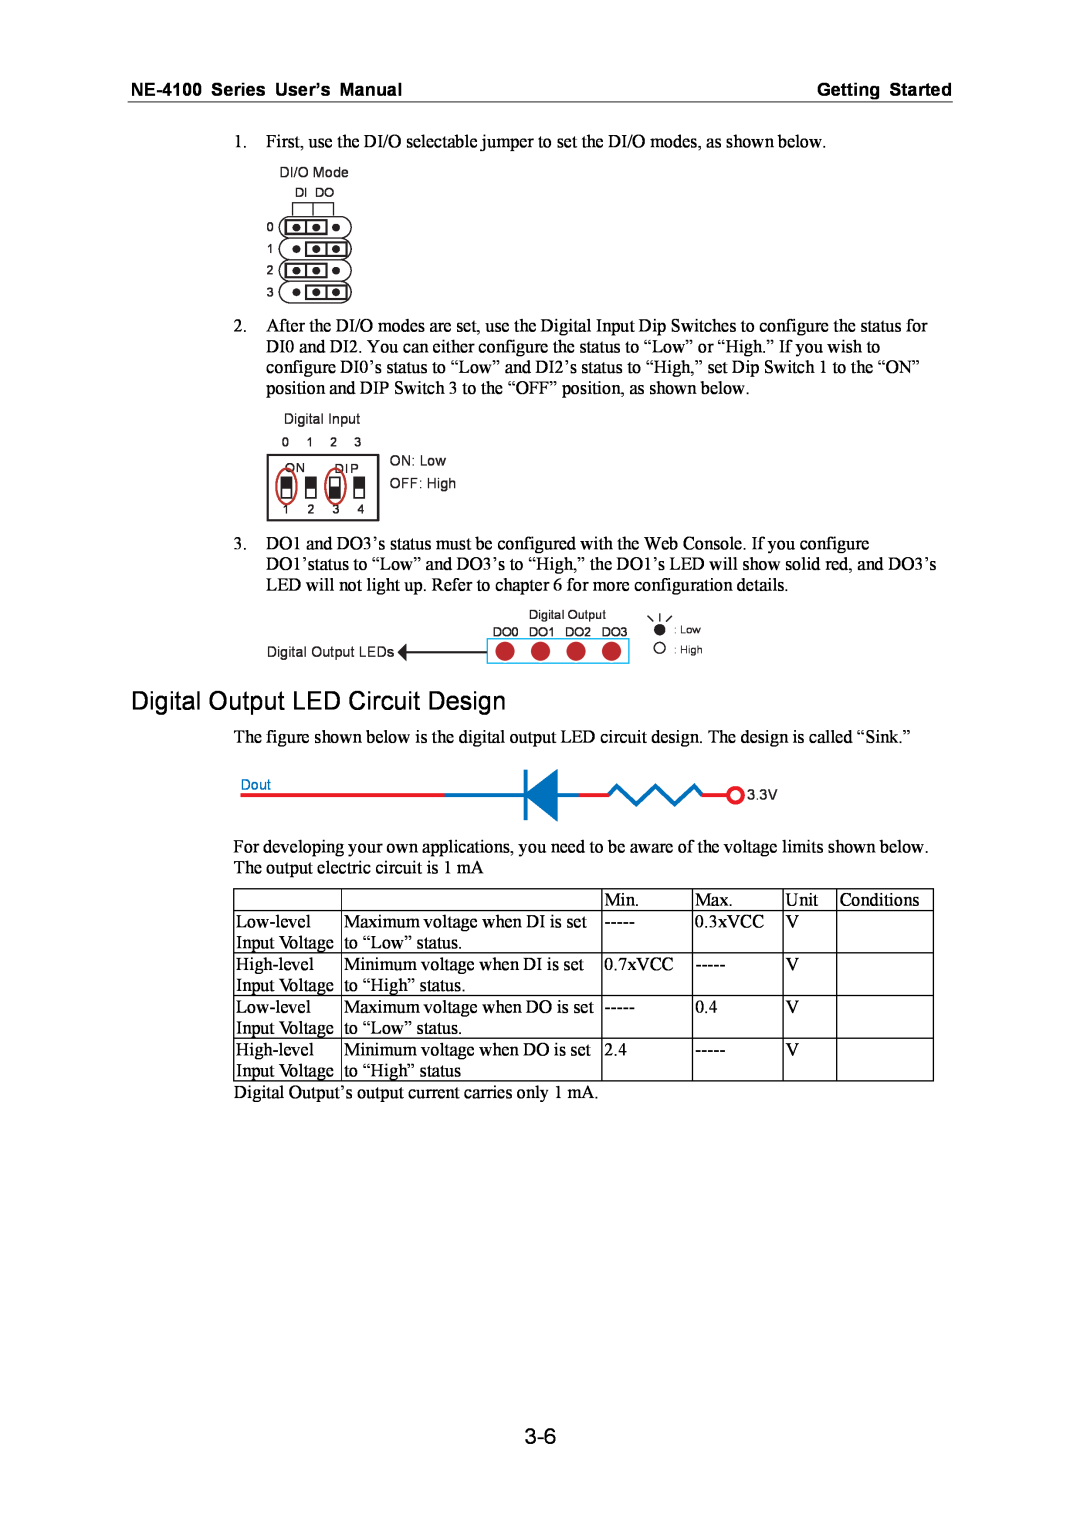 Moxa Technologies user manual Digital Output LED Circuit Design, NE-4100 Series User’s Manual, Getting Started, Dout 